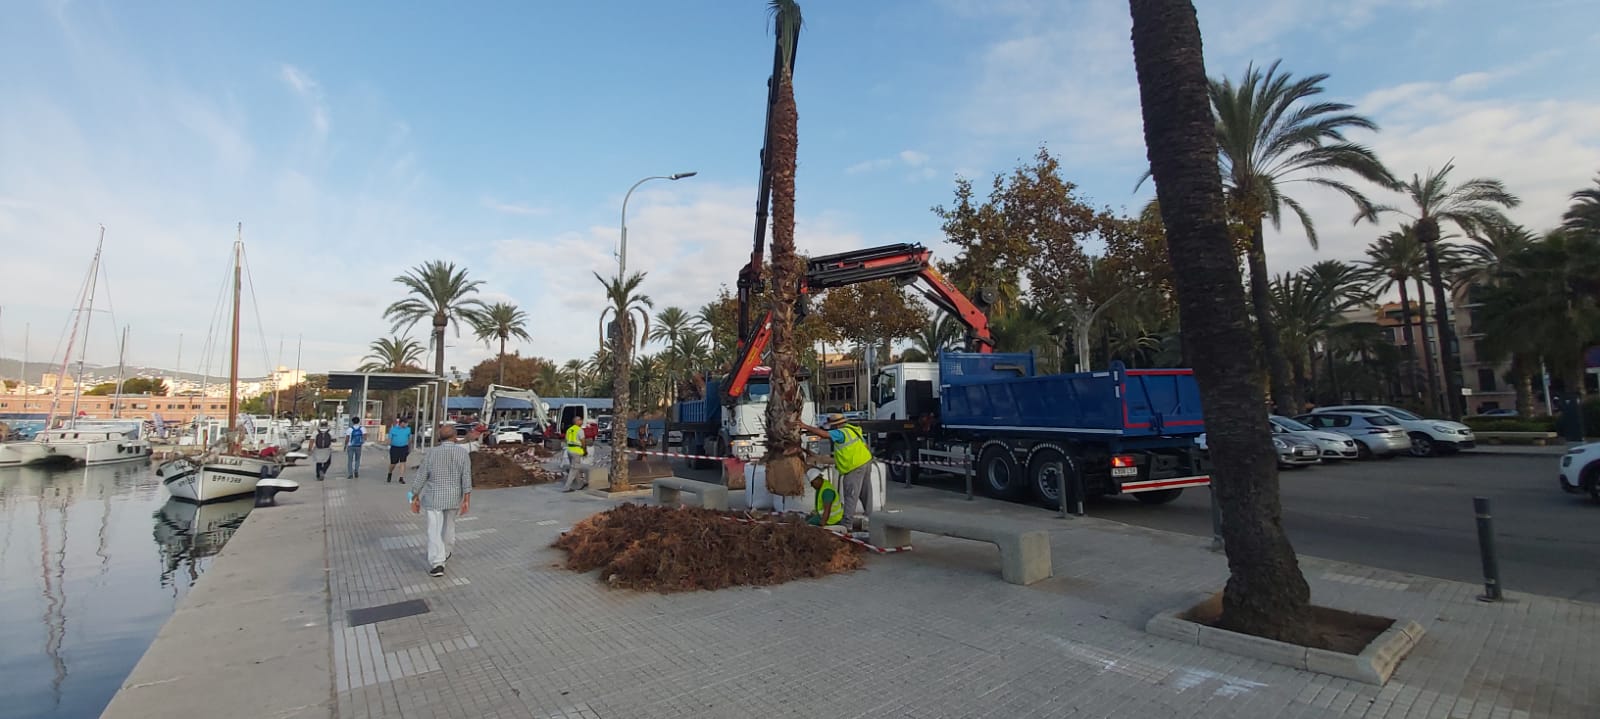 The APB has begun the replacement of palm trees representing structural risks in the Port of Palma